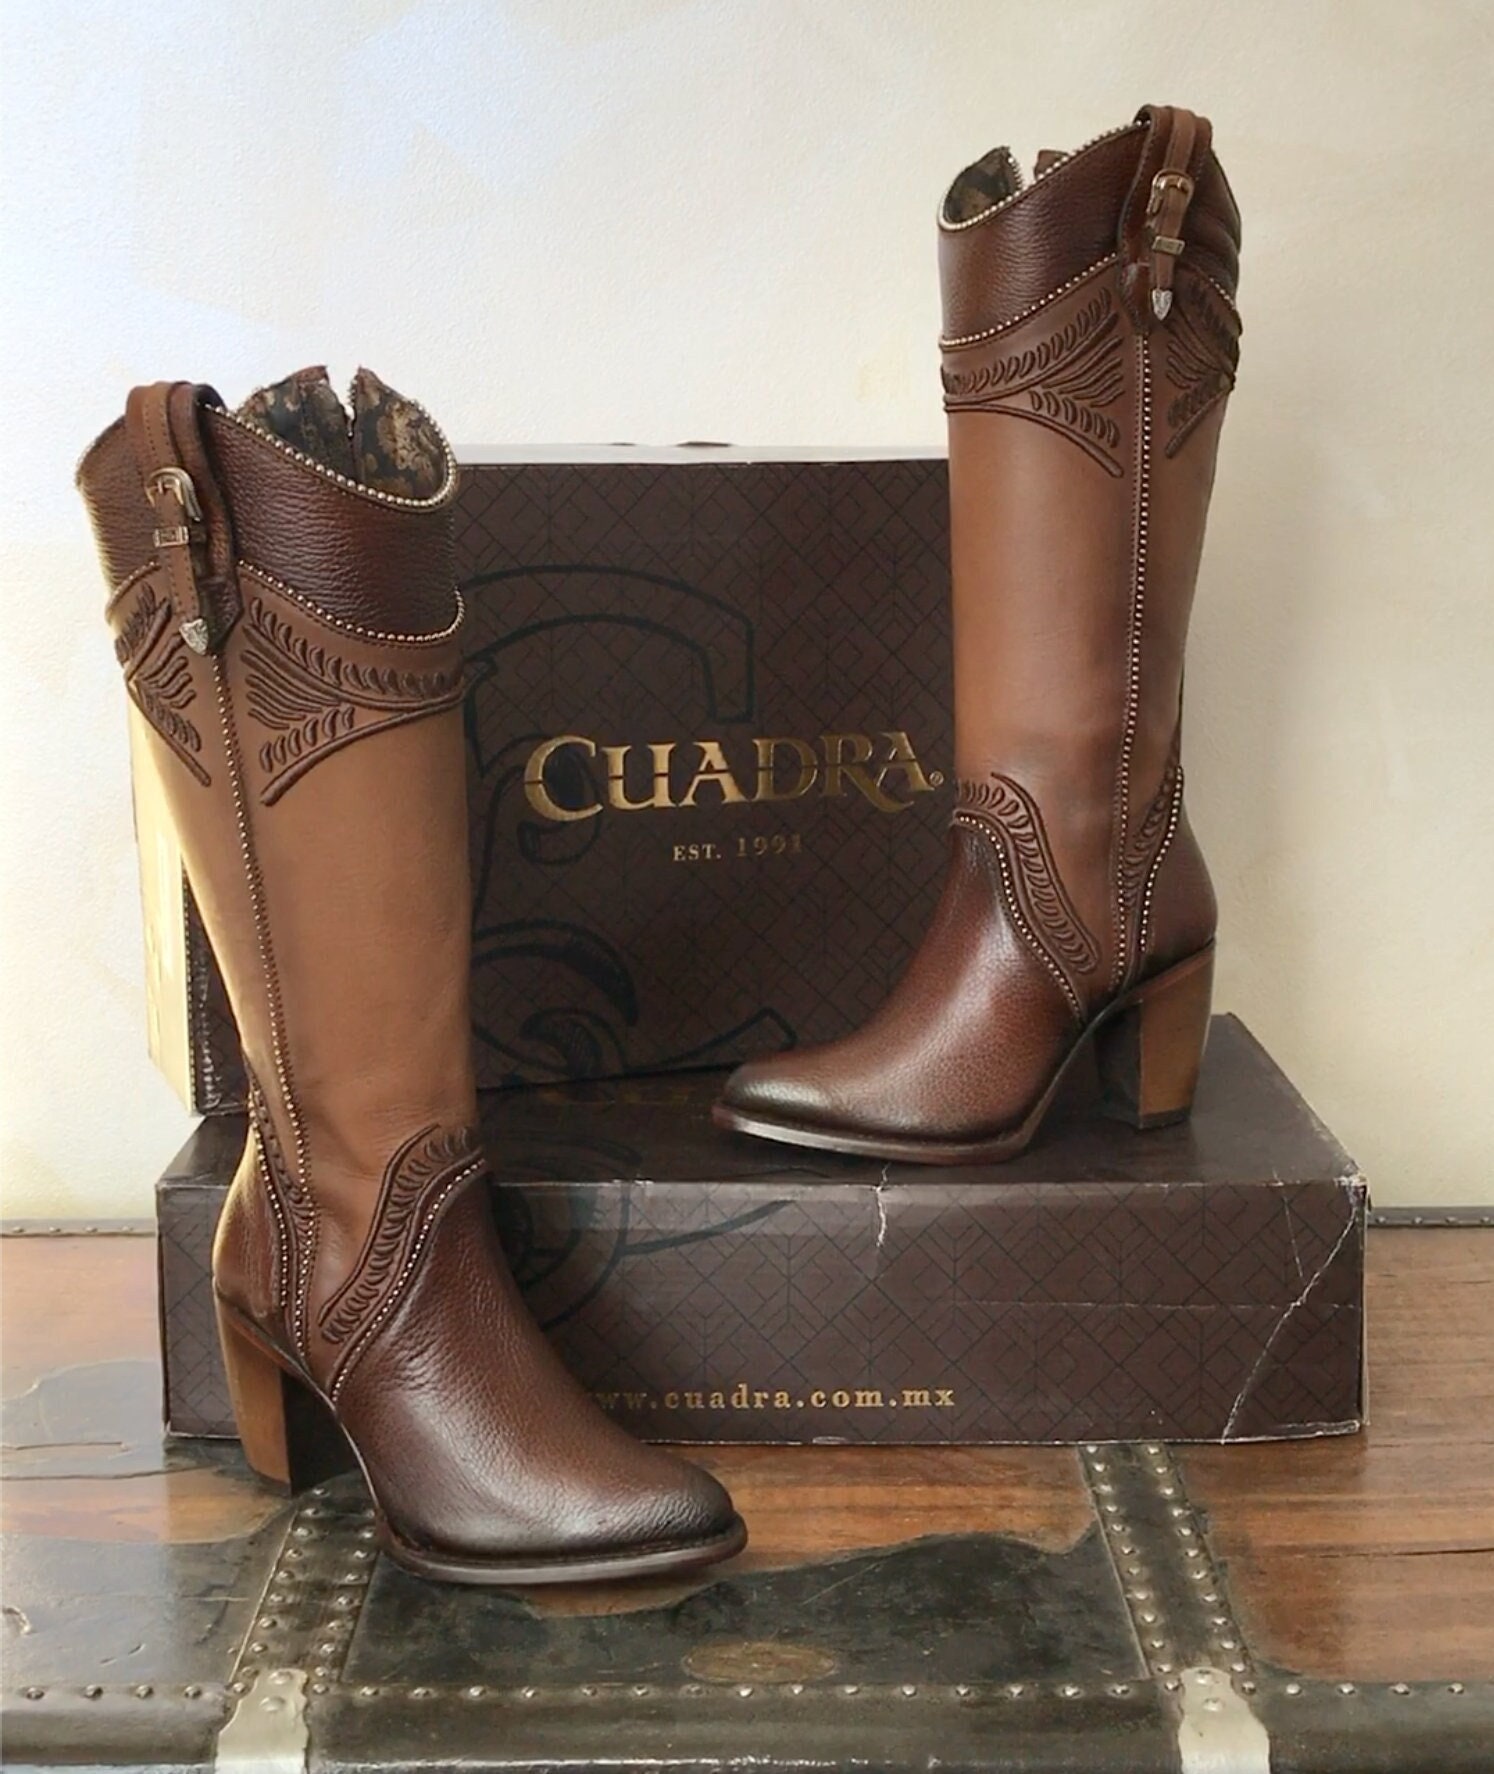 Cuadra Boots Hand Painted Honey Leather - Etsy